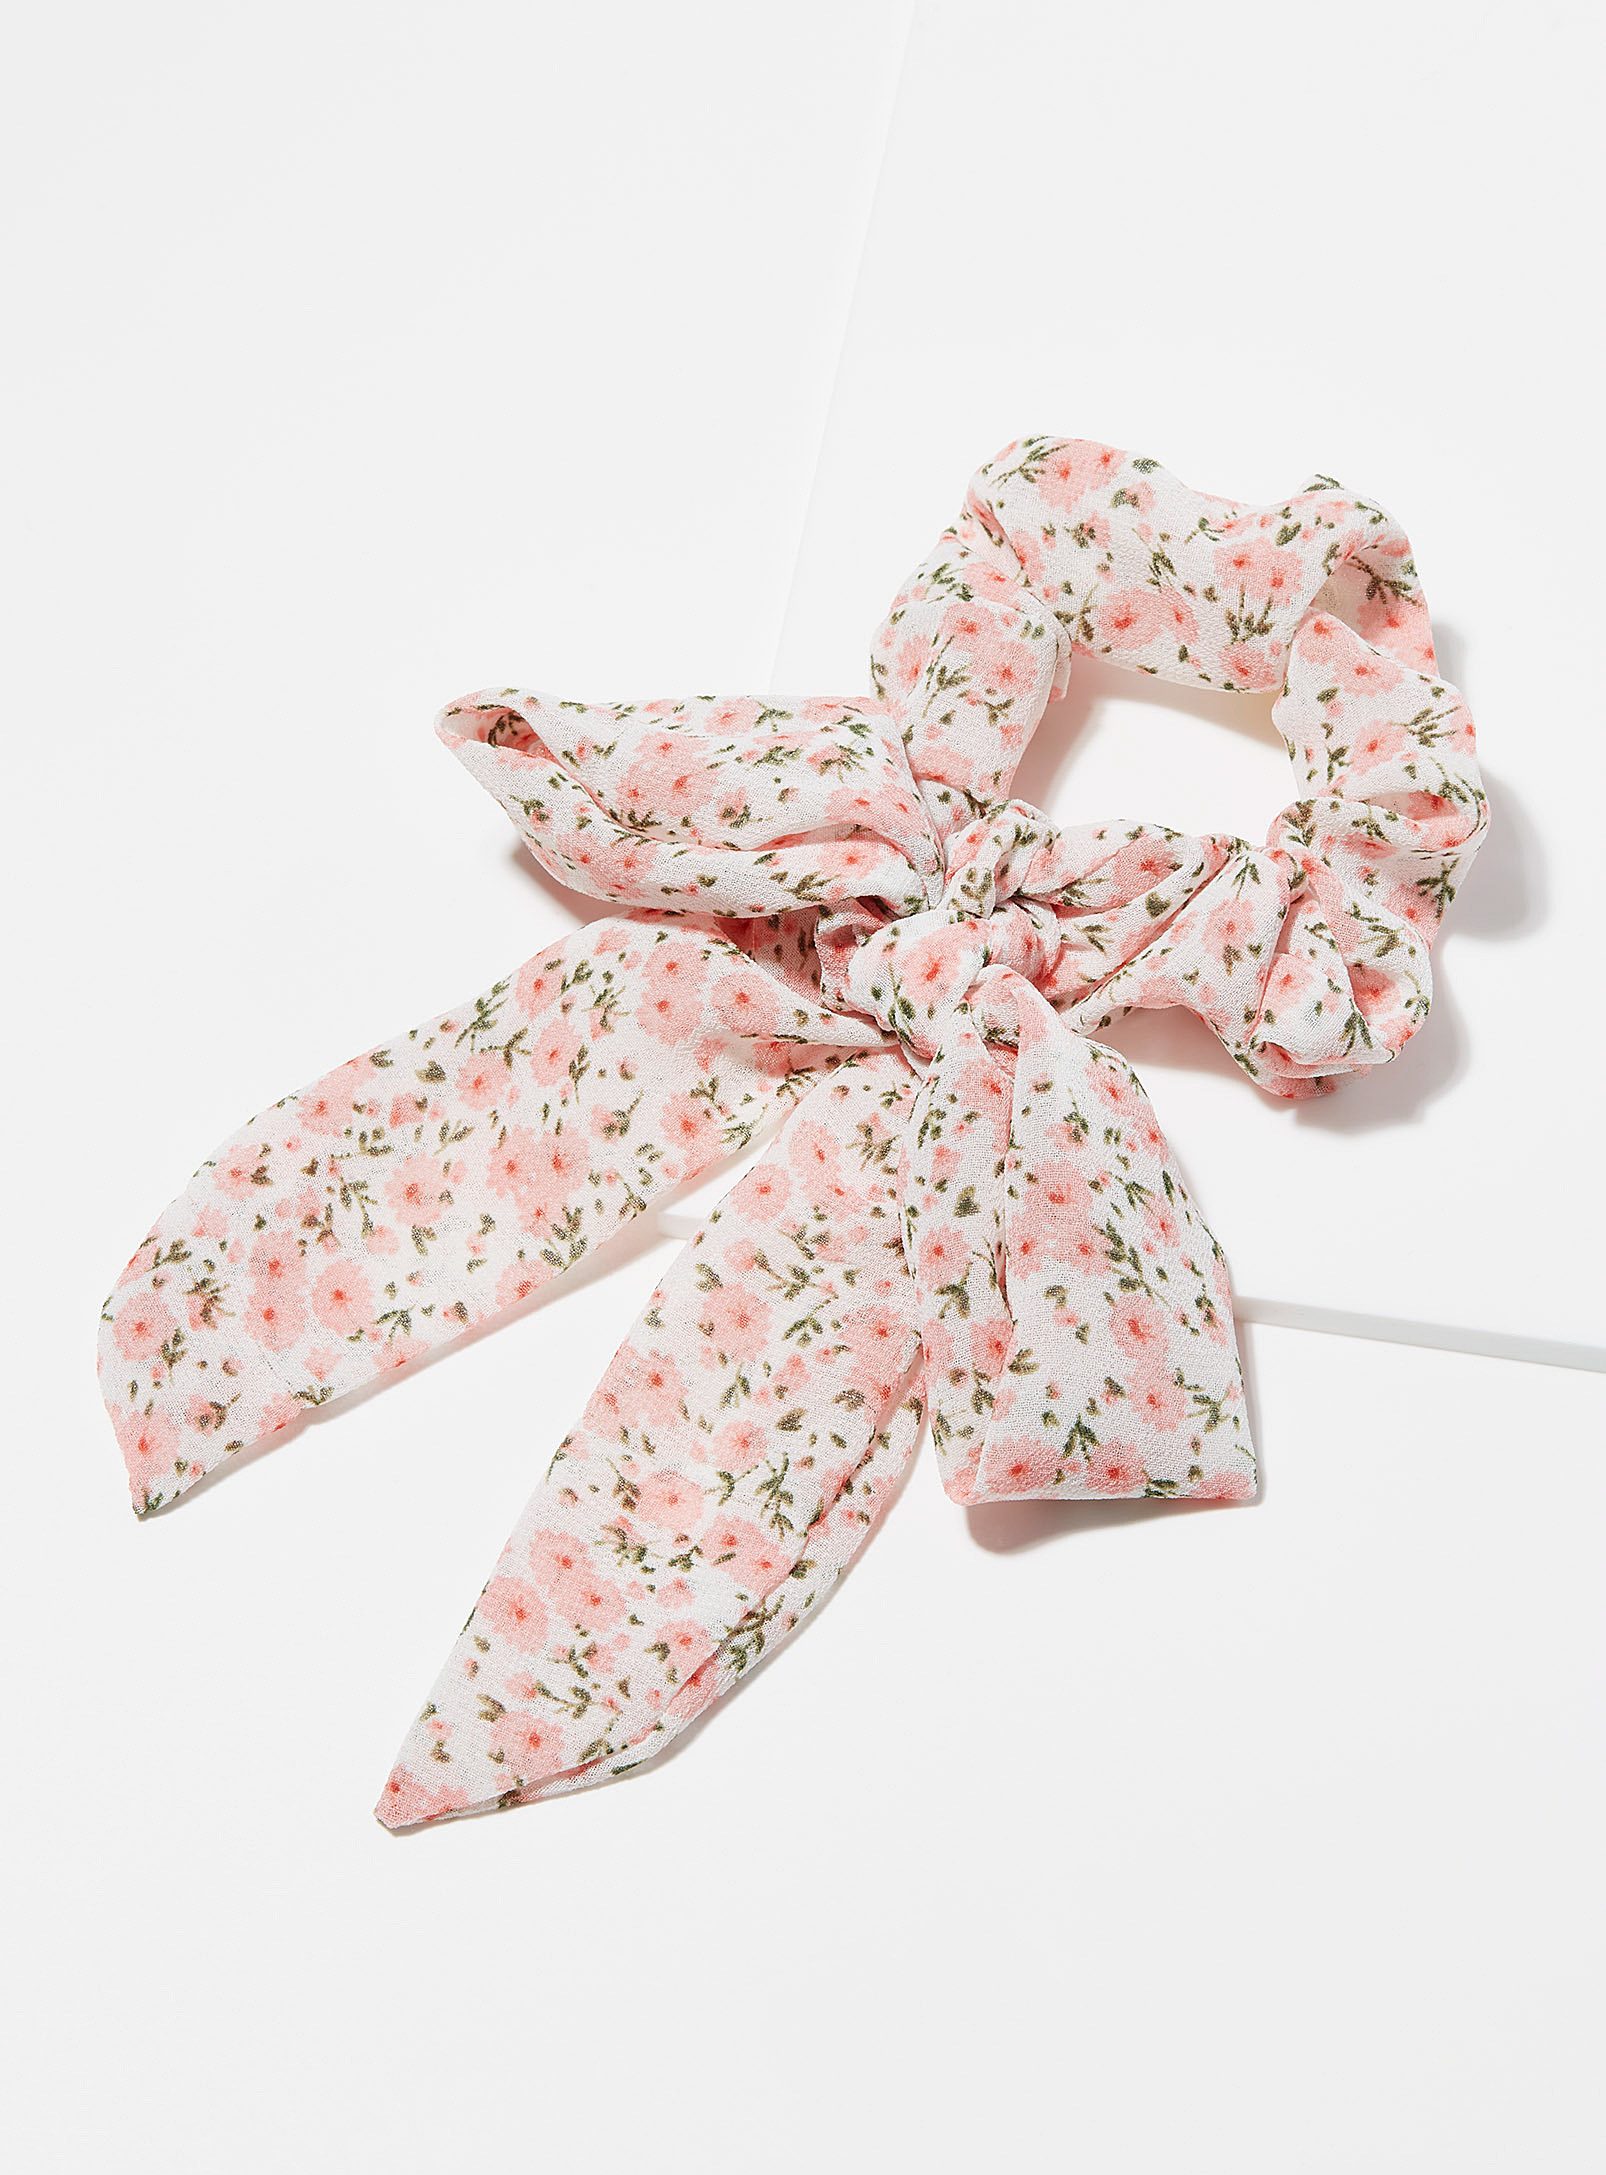 A scrunchie with a bow